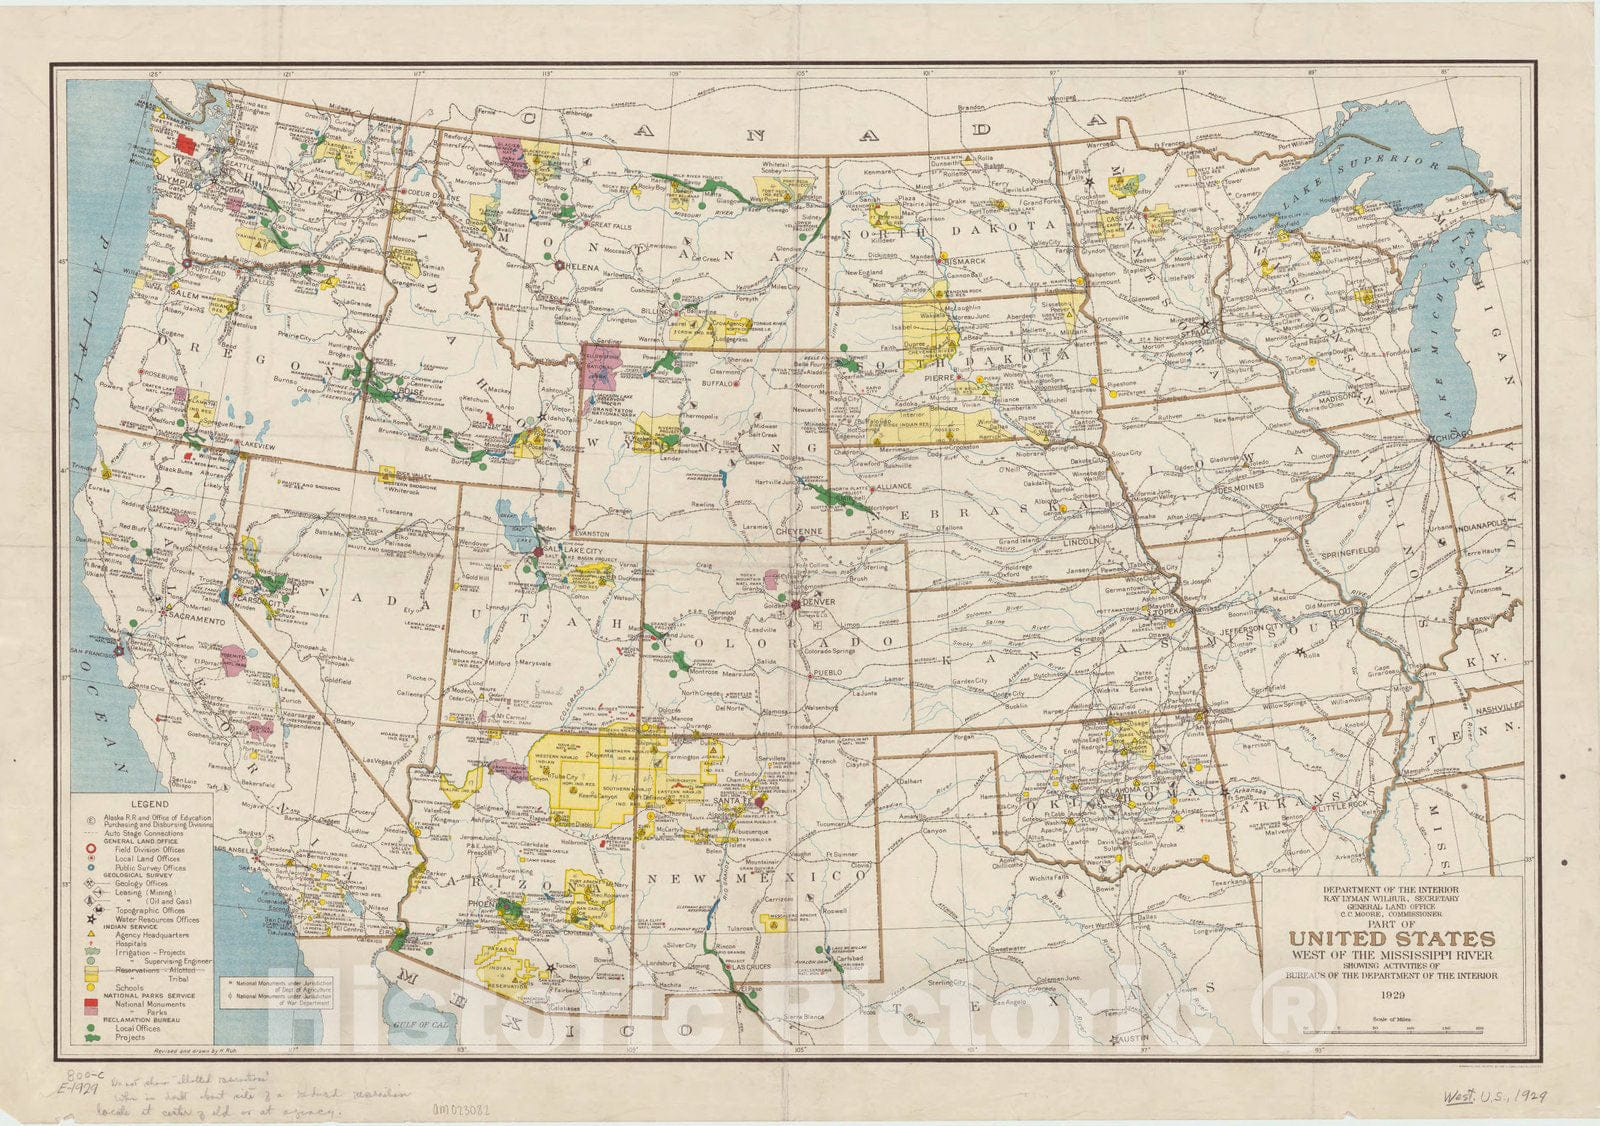 Map : United States, western 1929, Part of United States west of the Mississippi River : showing activities of Bureaus of the Department of the Interior